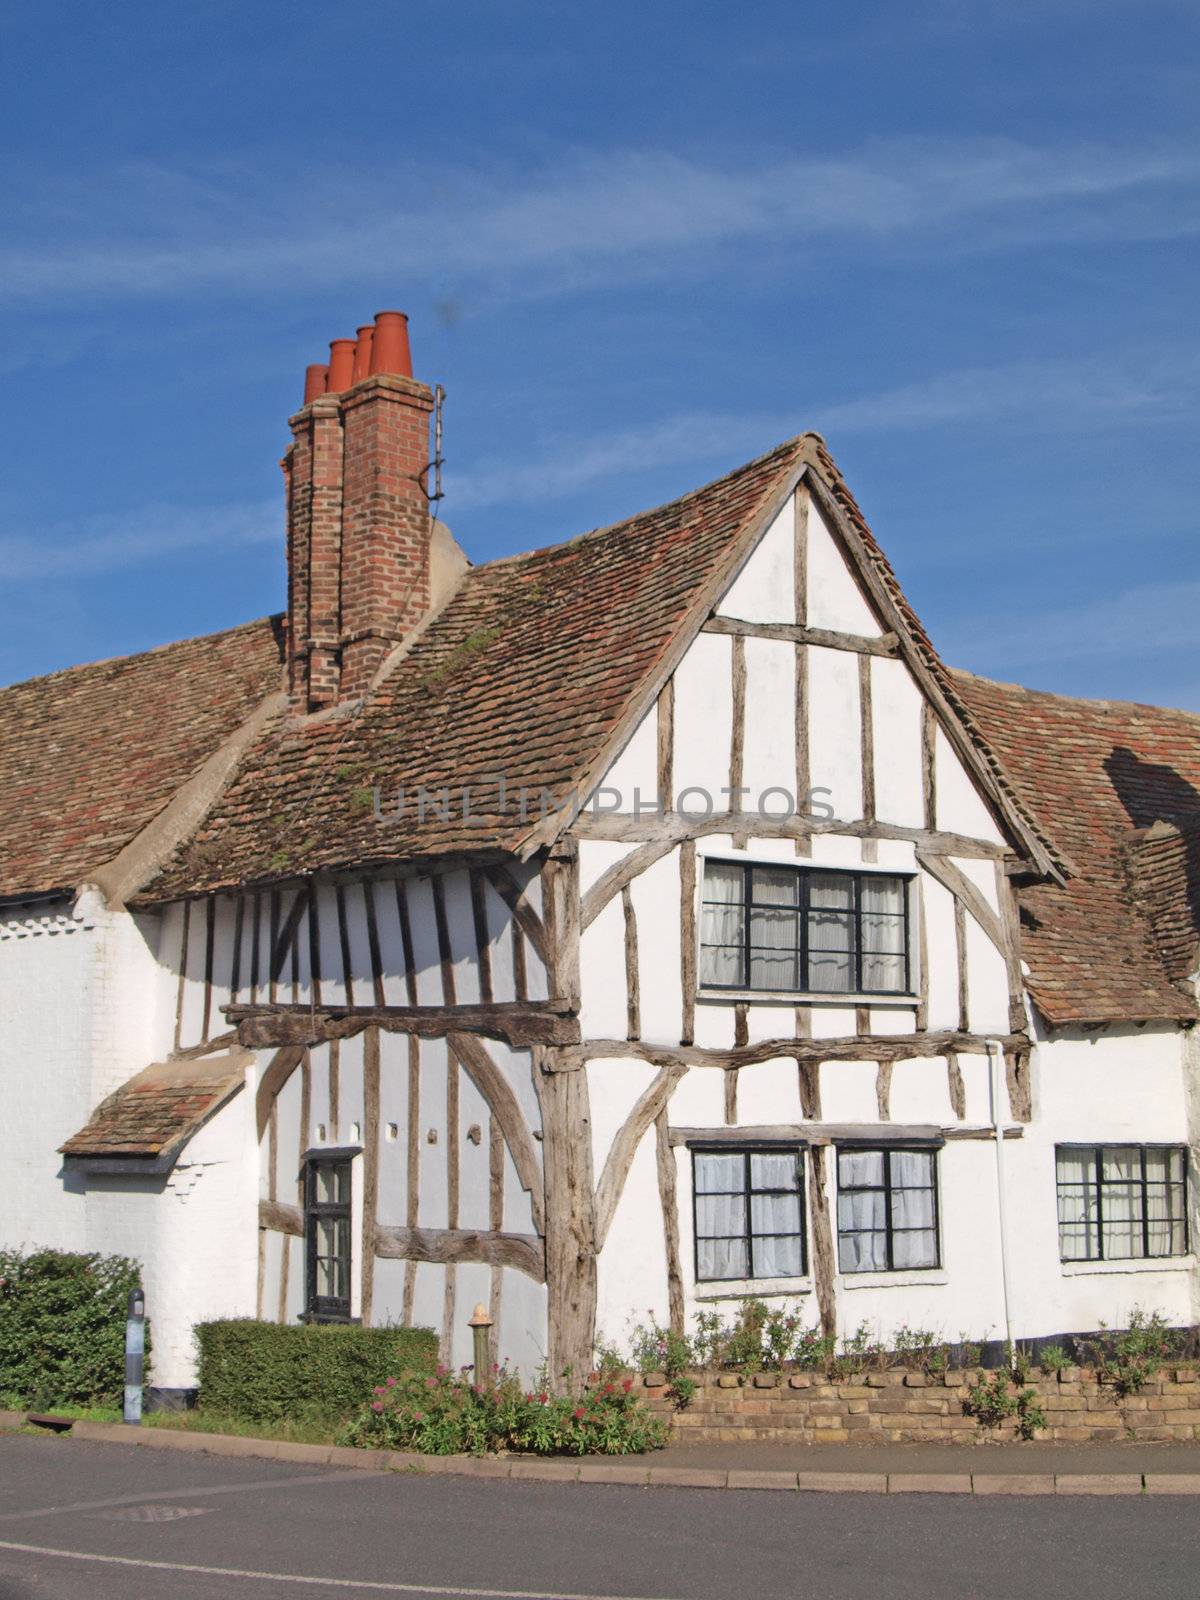 One of many timber framed cottages in  Houghton ,that is famous for its mill, by the Great Ouse river.